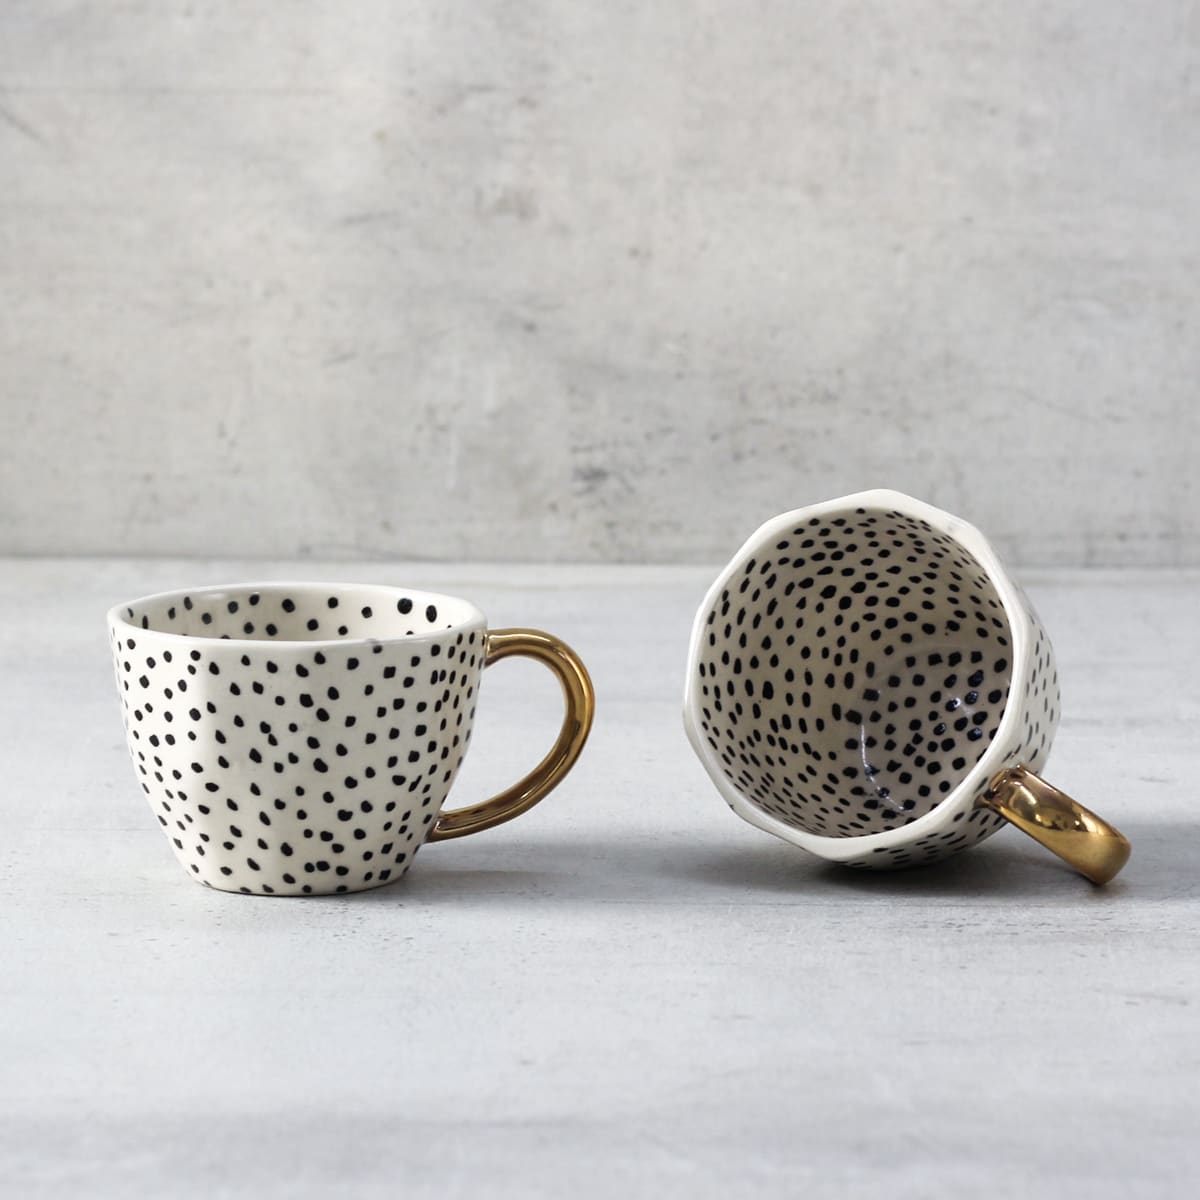 Charlotte Polka Dot Handmade Ceramic Cup with Golden Handle